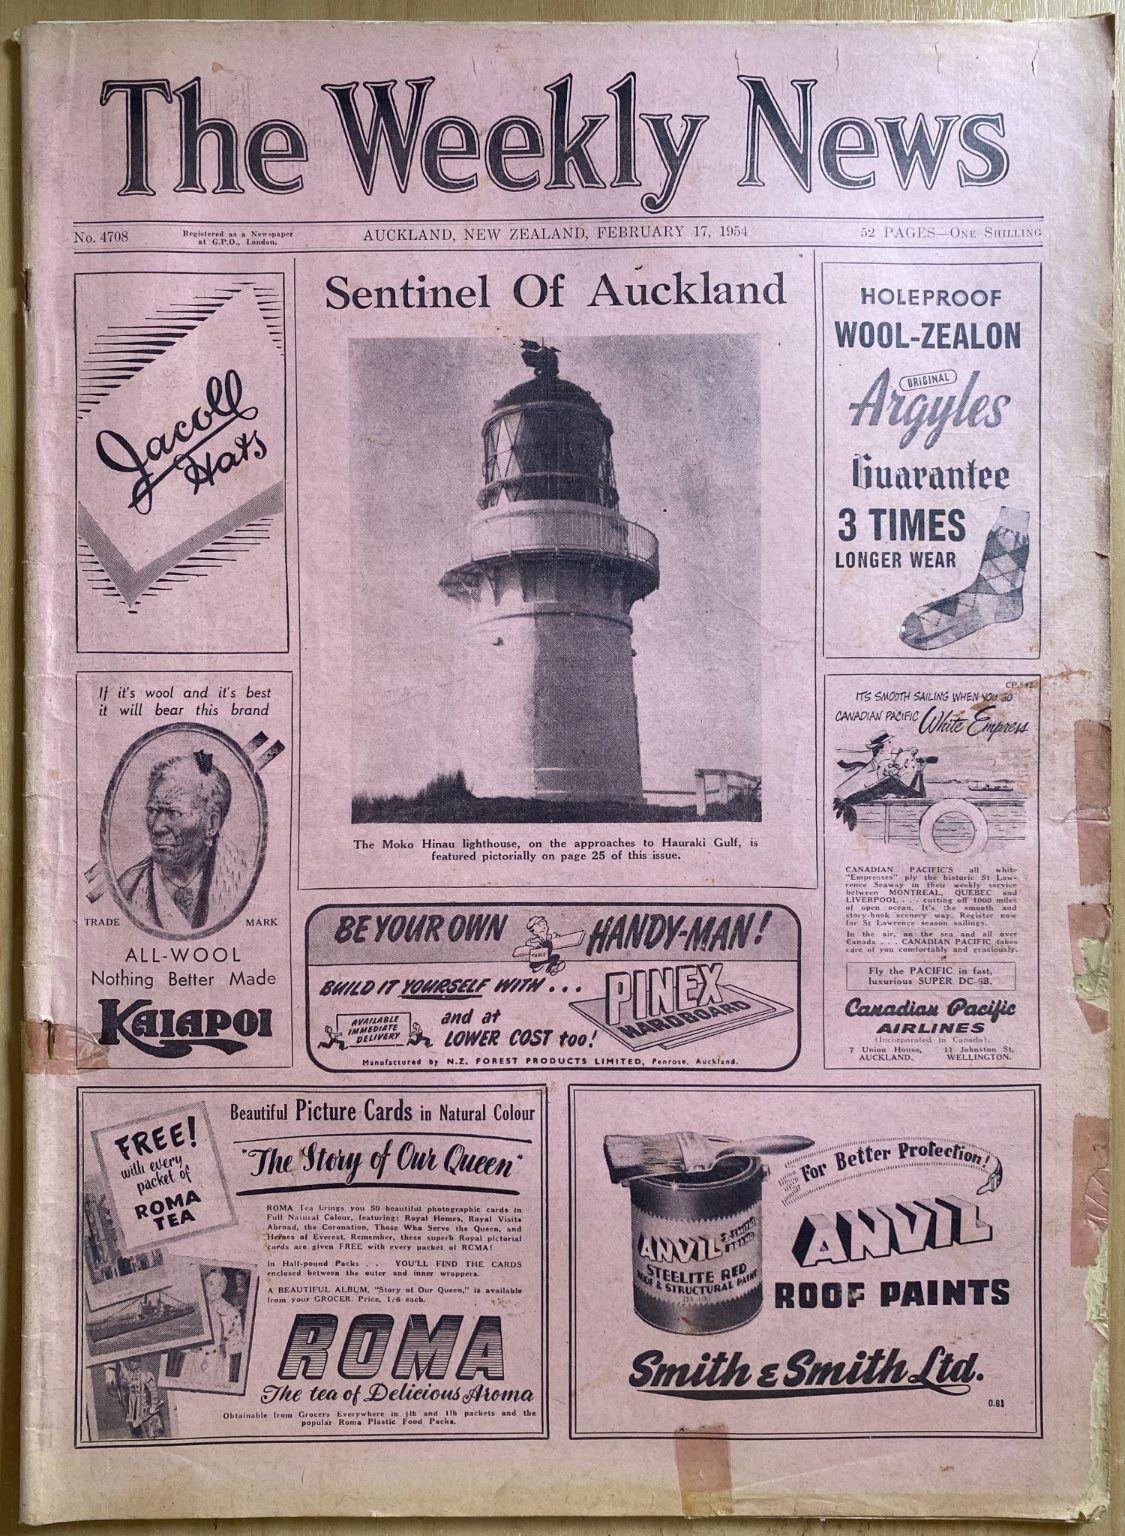 OLD NEWSPAPER: The Weekly News - No. 4708, 17 February 1954